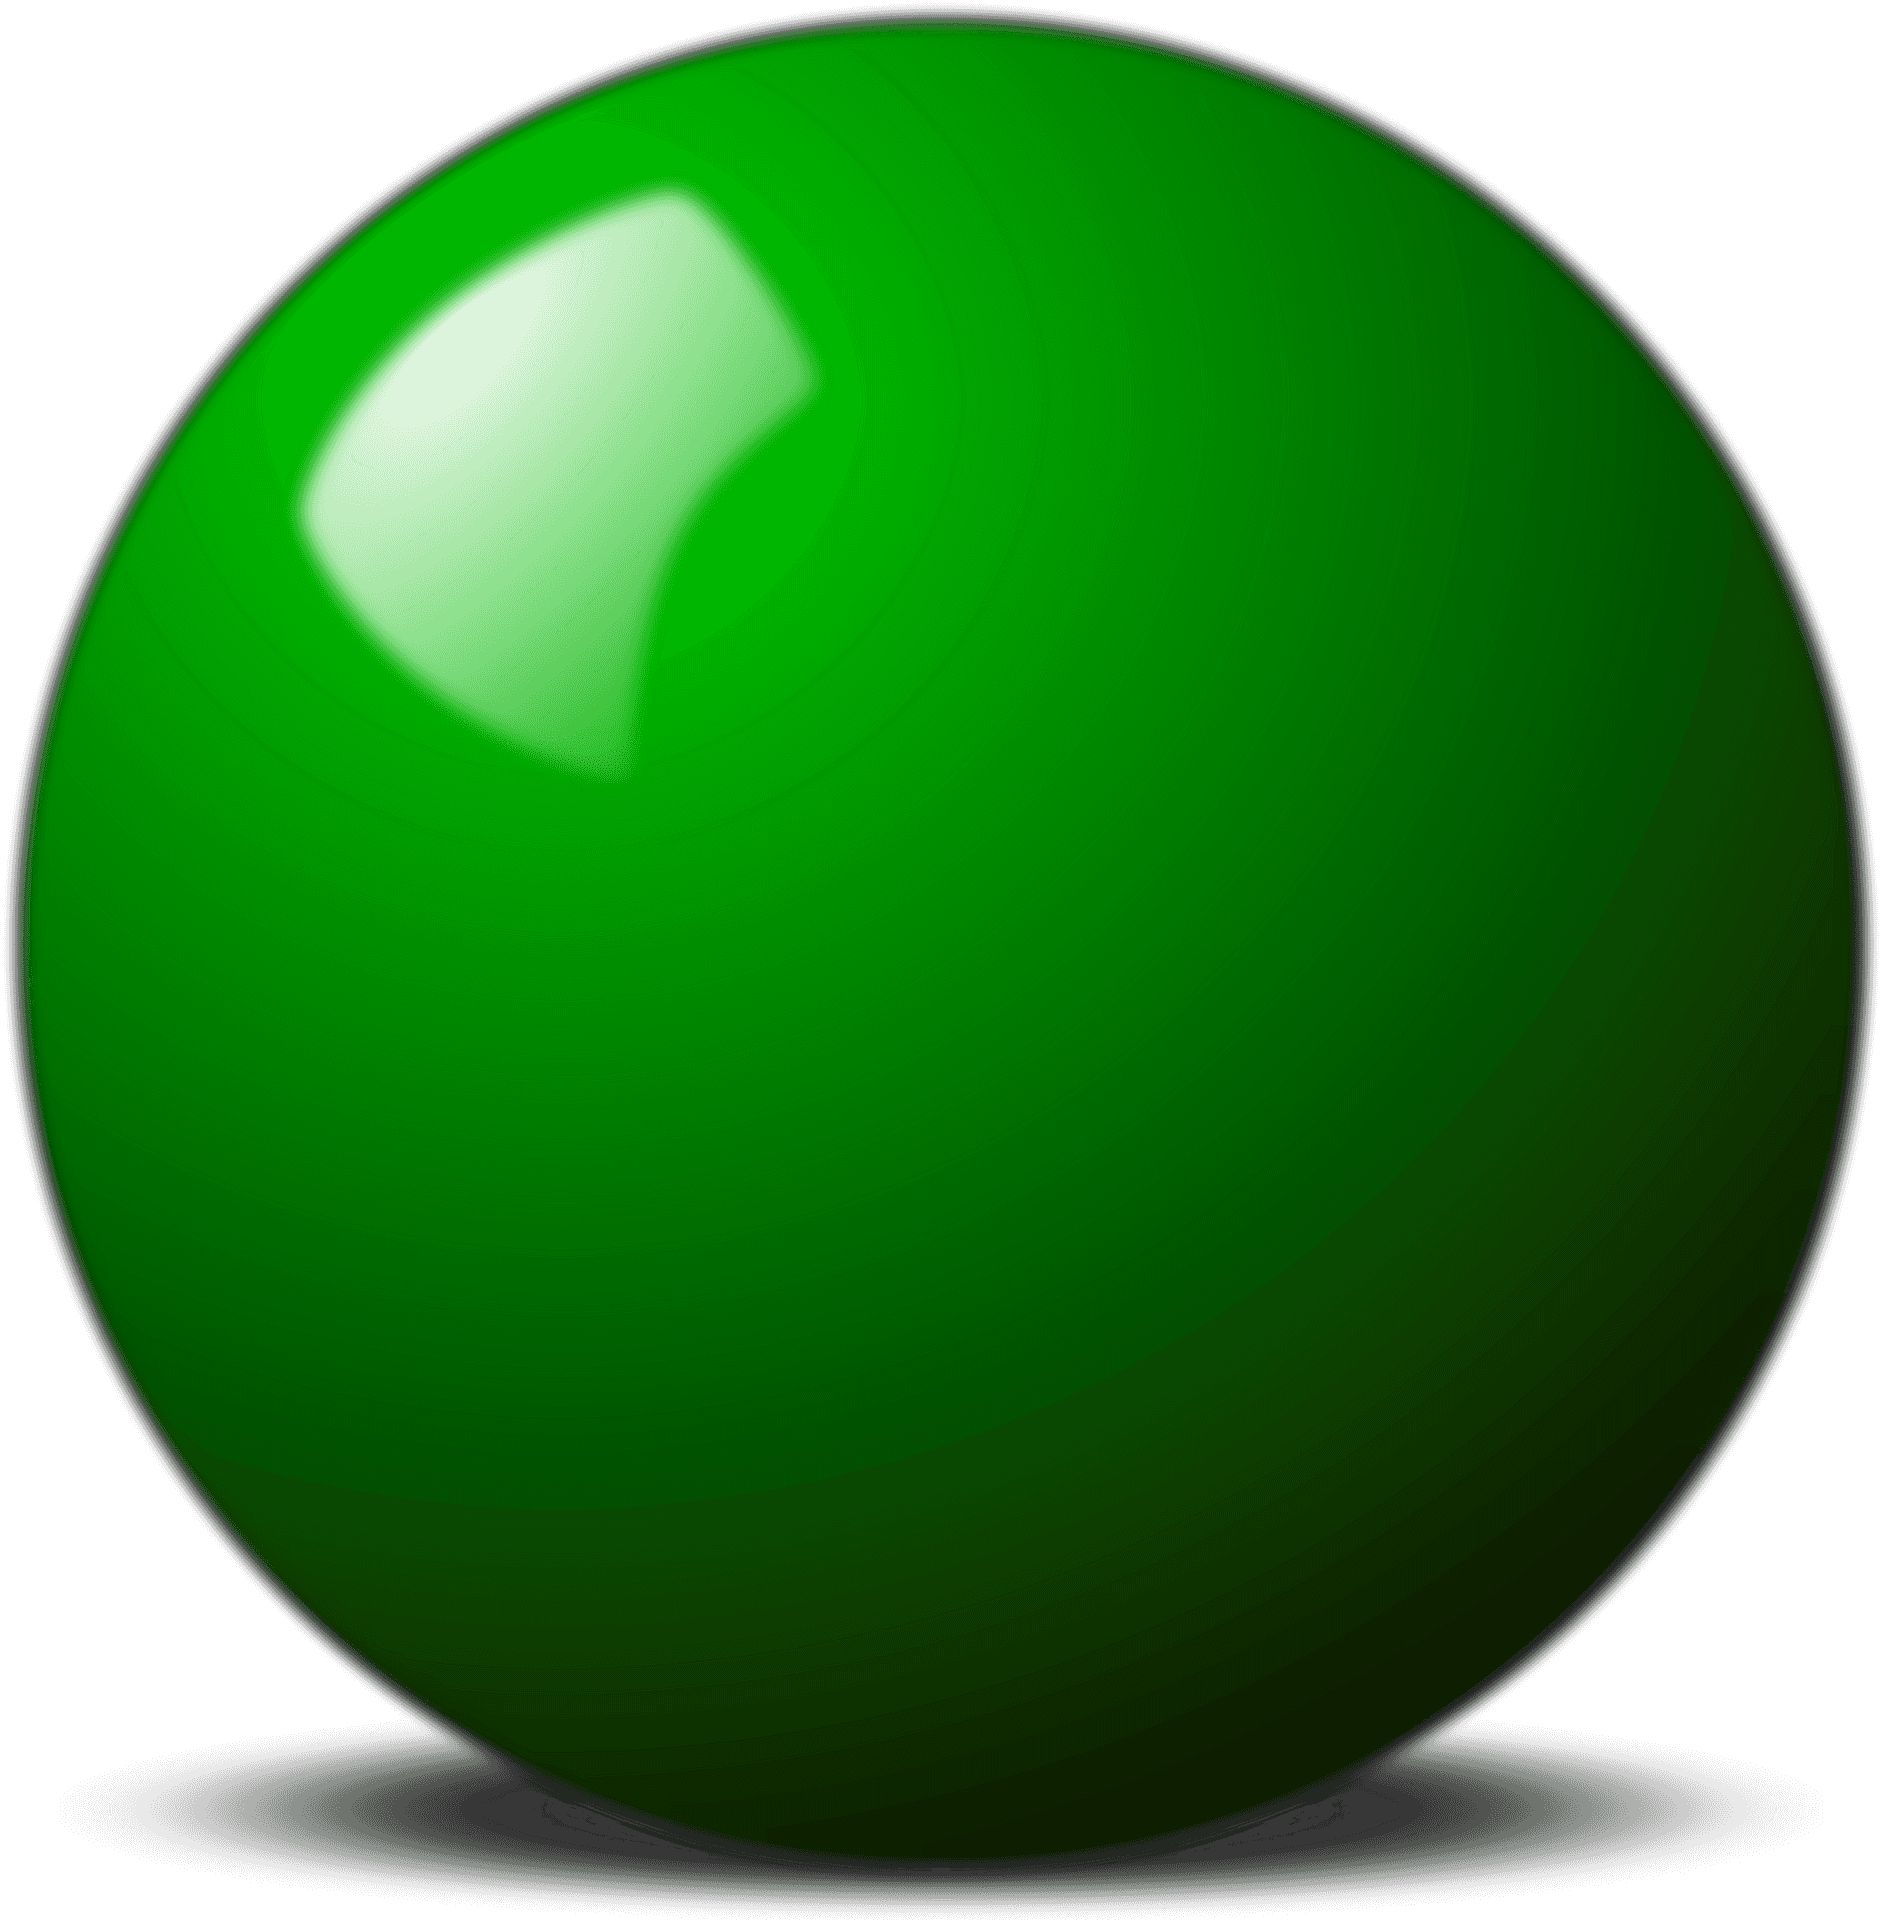 Green Snooker Ball Graphic PNG image